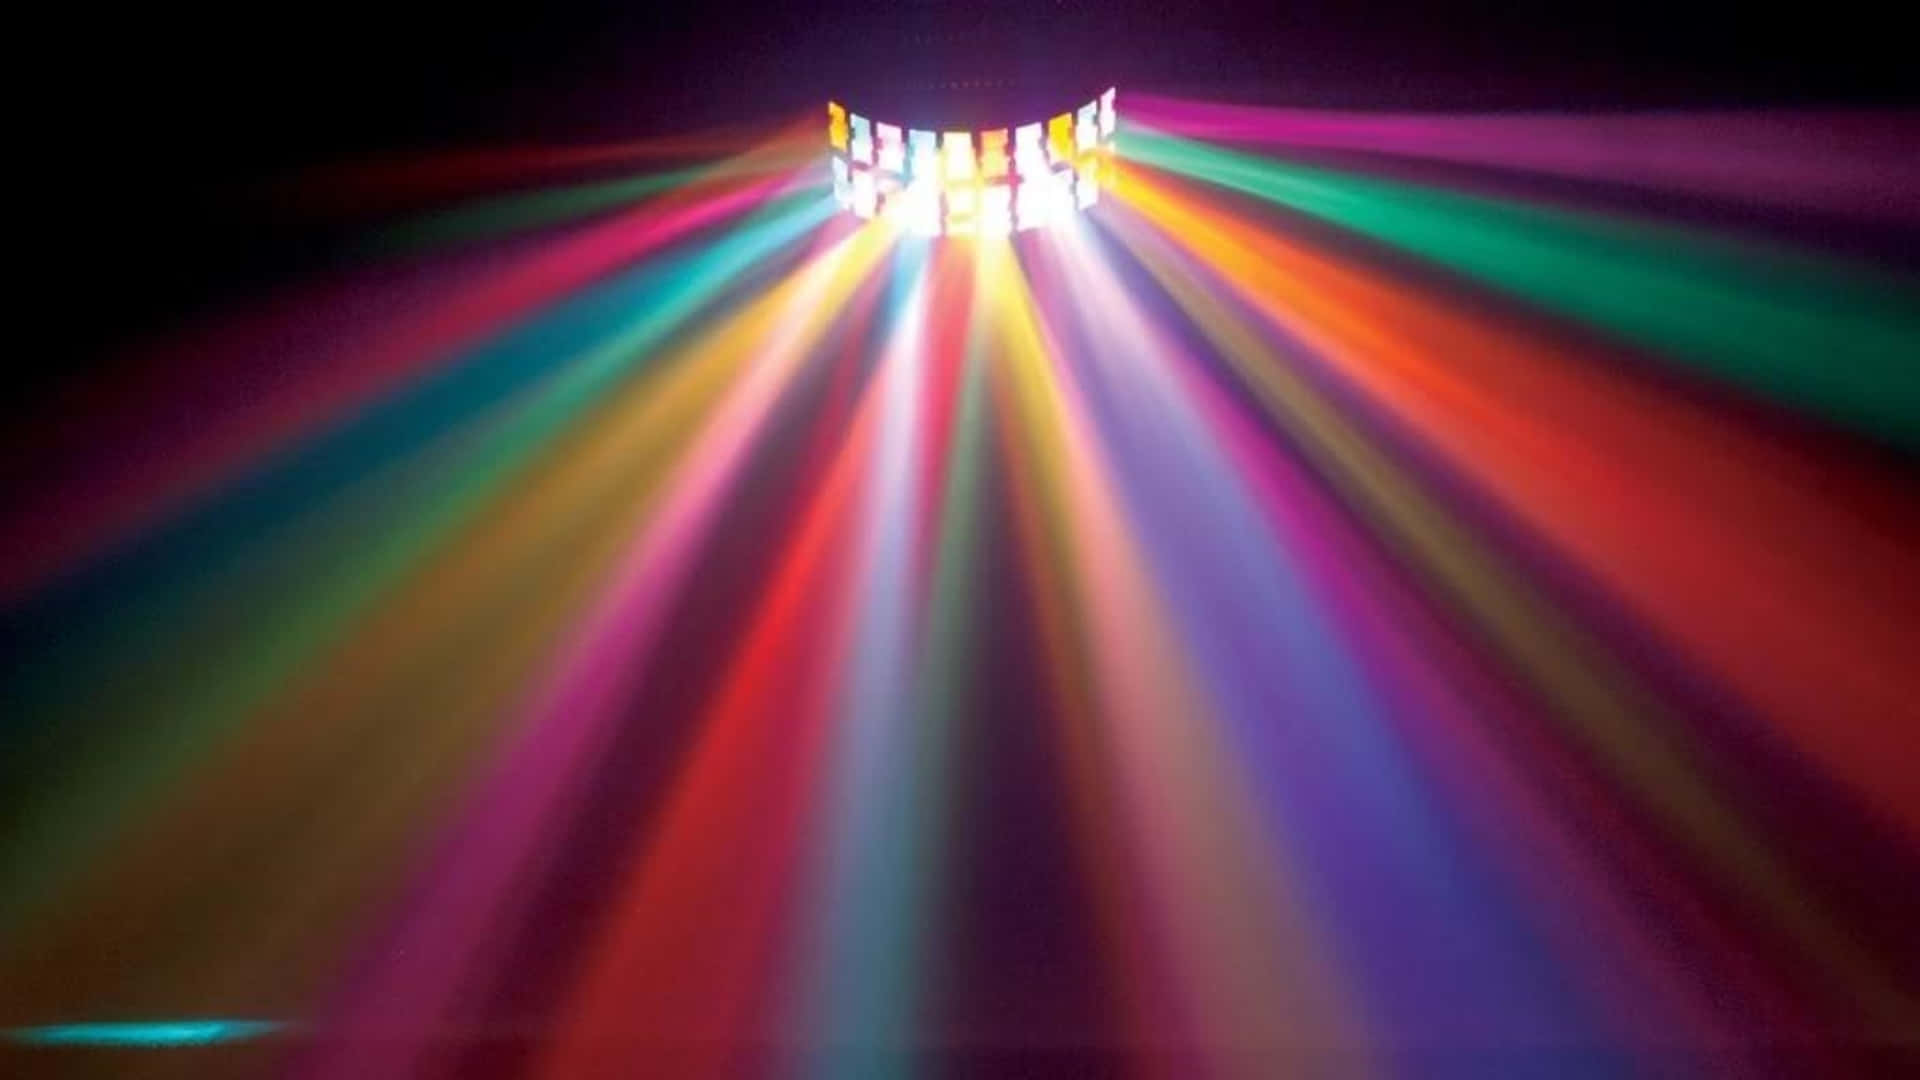 A Colorful Light Beam In The Dark